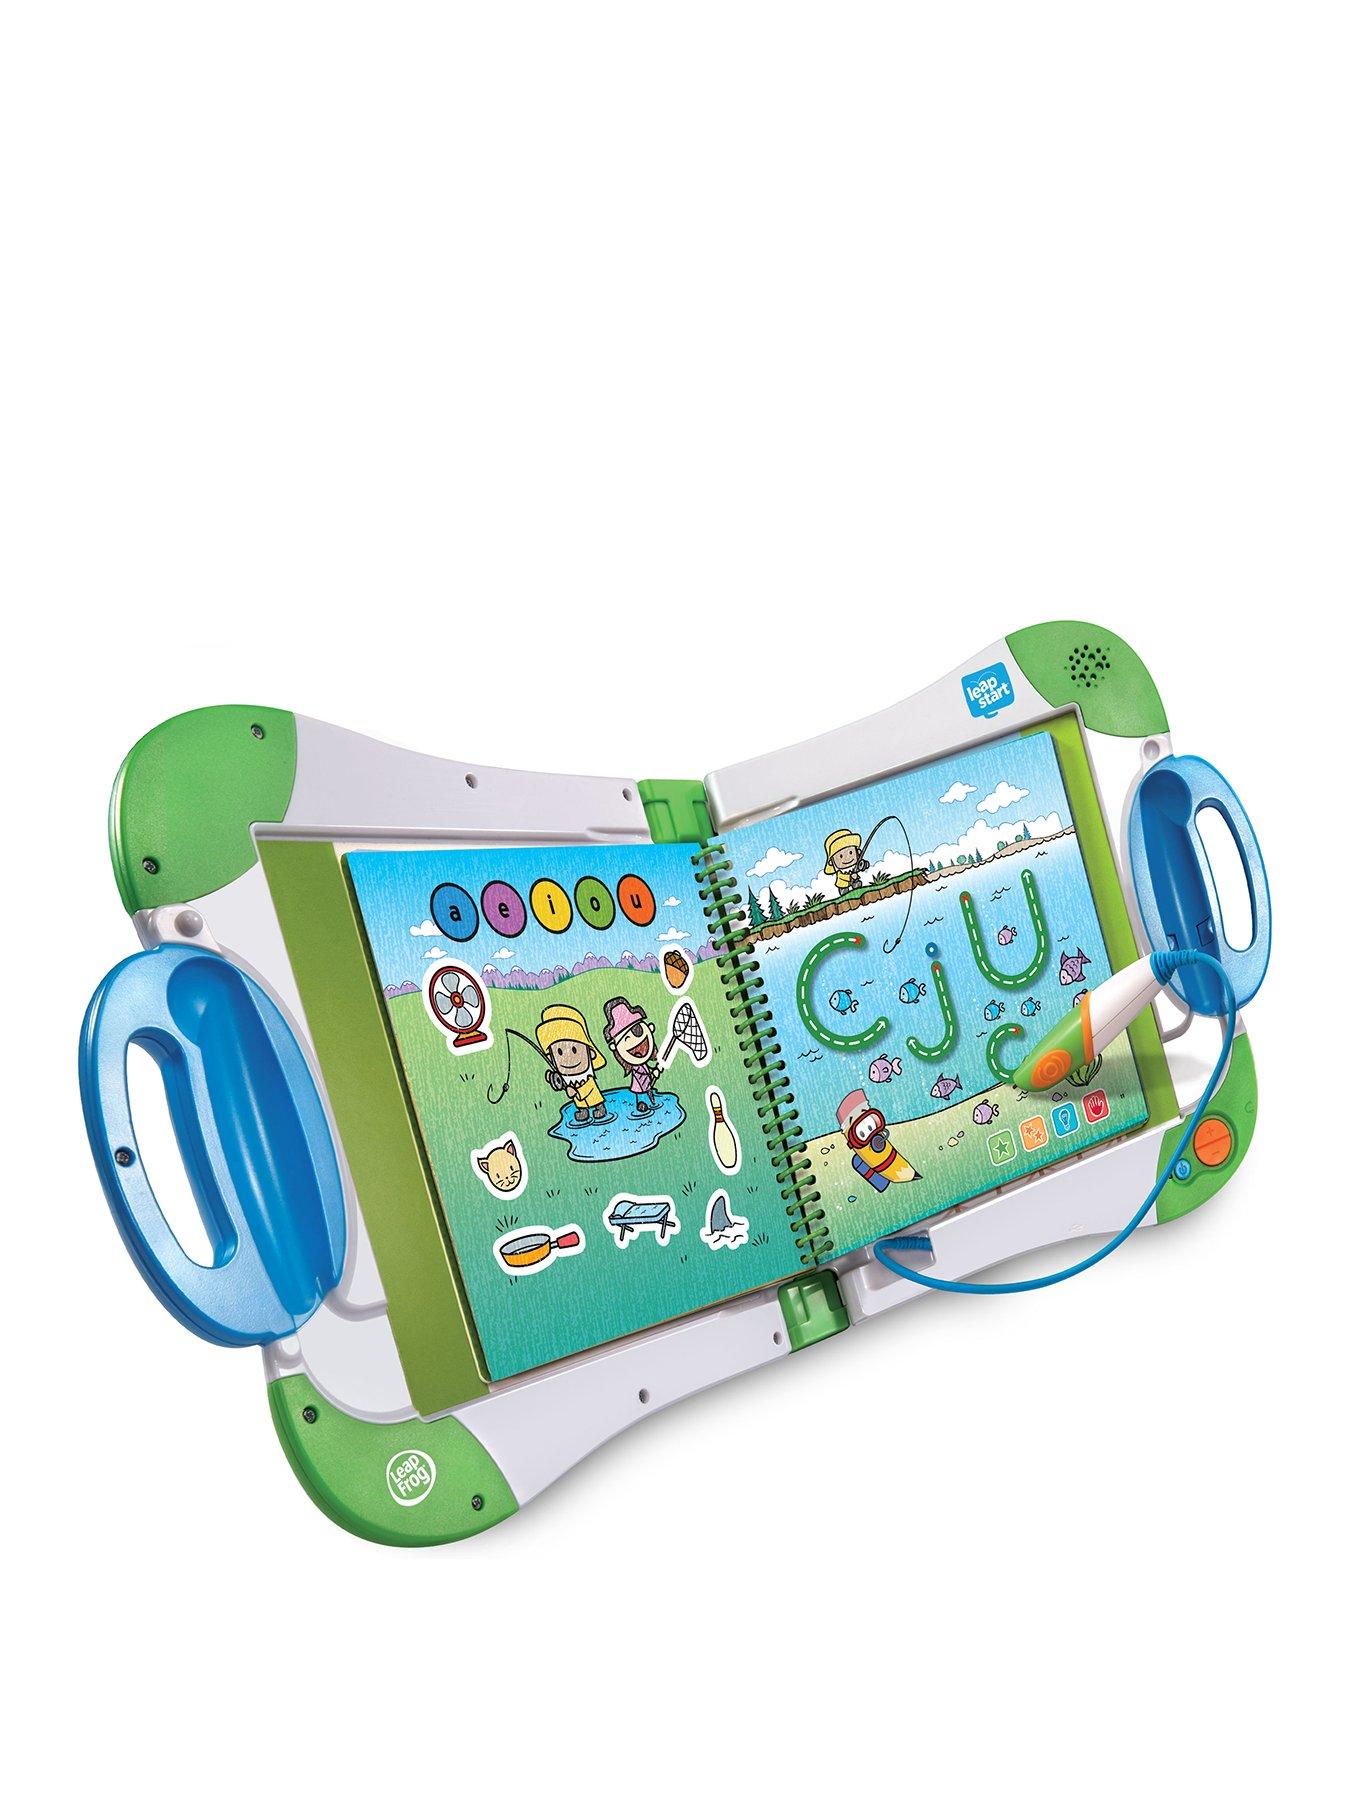  LeapFrog iQuest Handheld Expandable Study System with